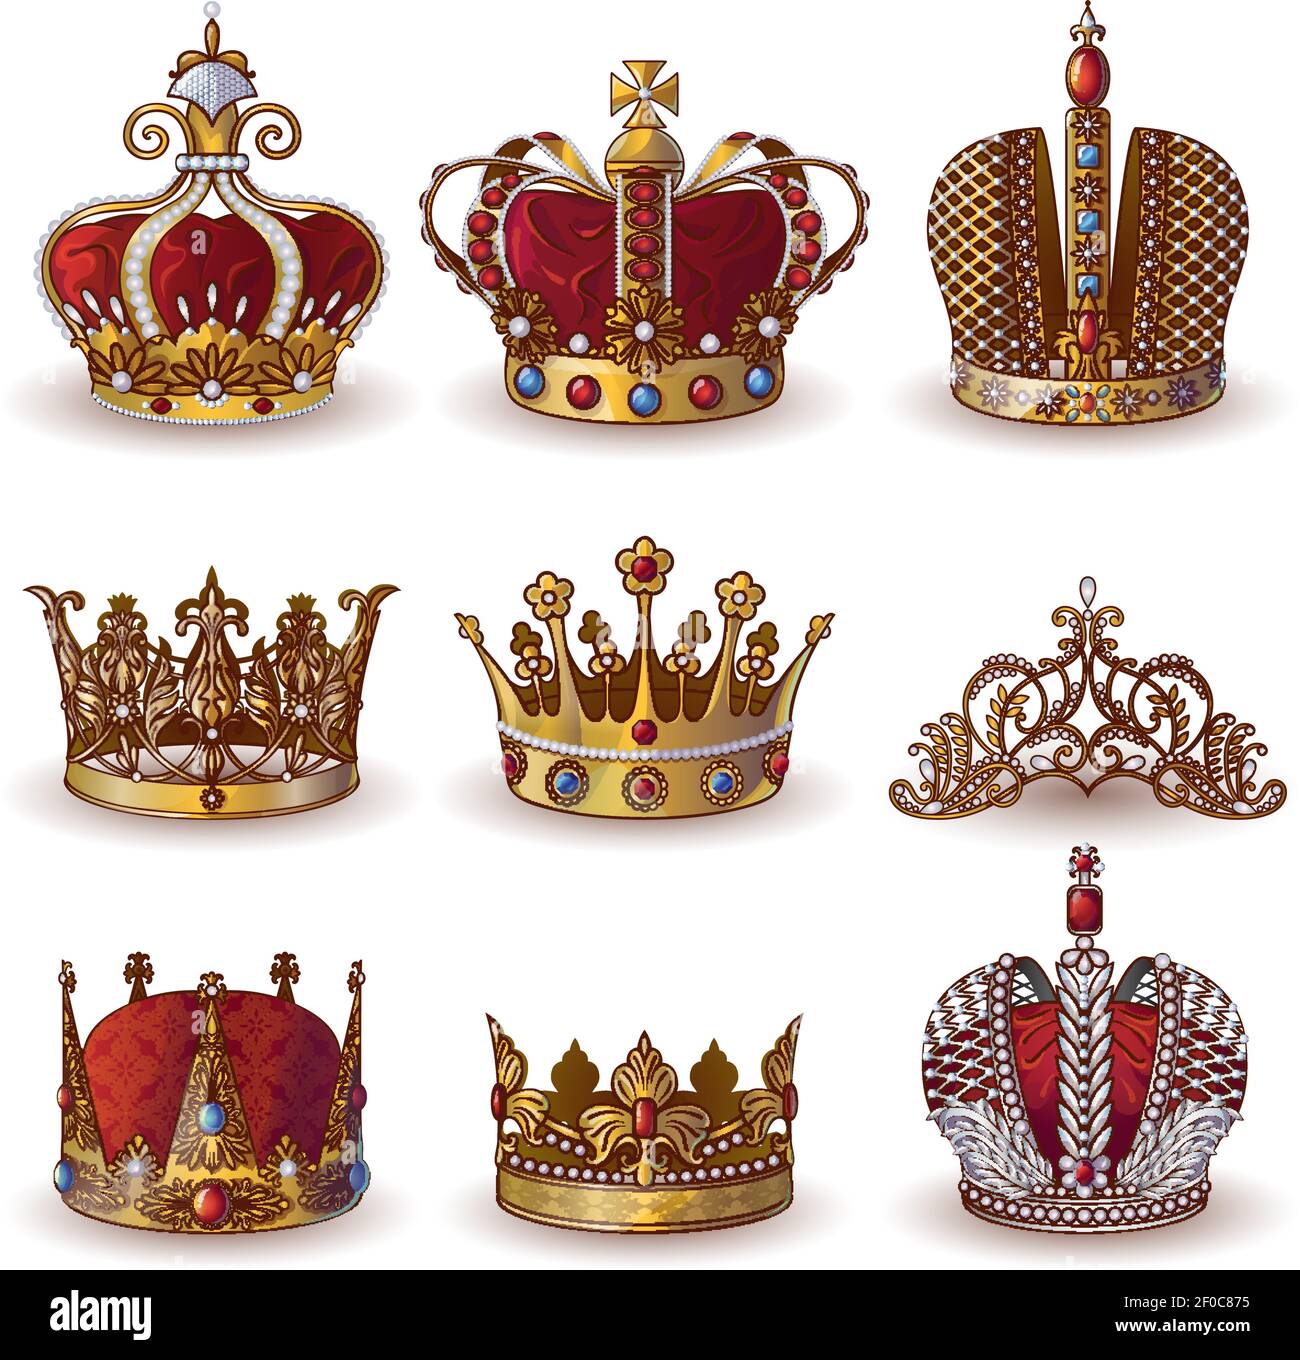 Real Royalty Crowns